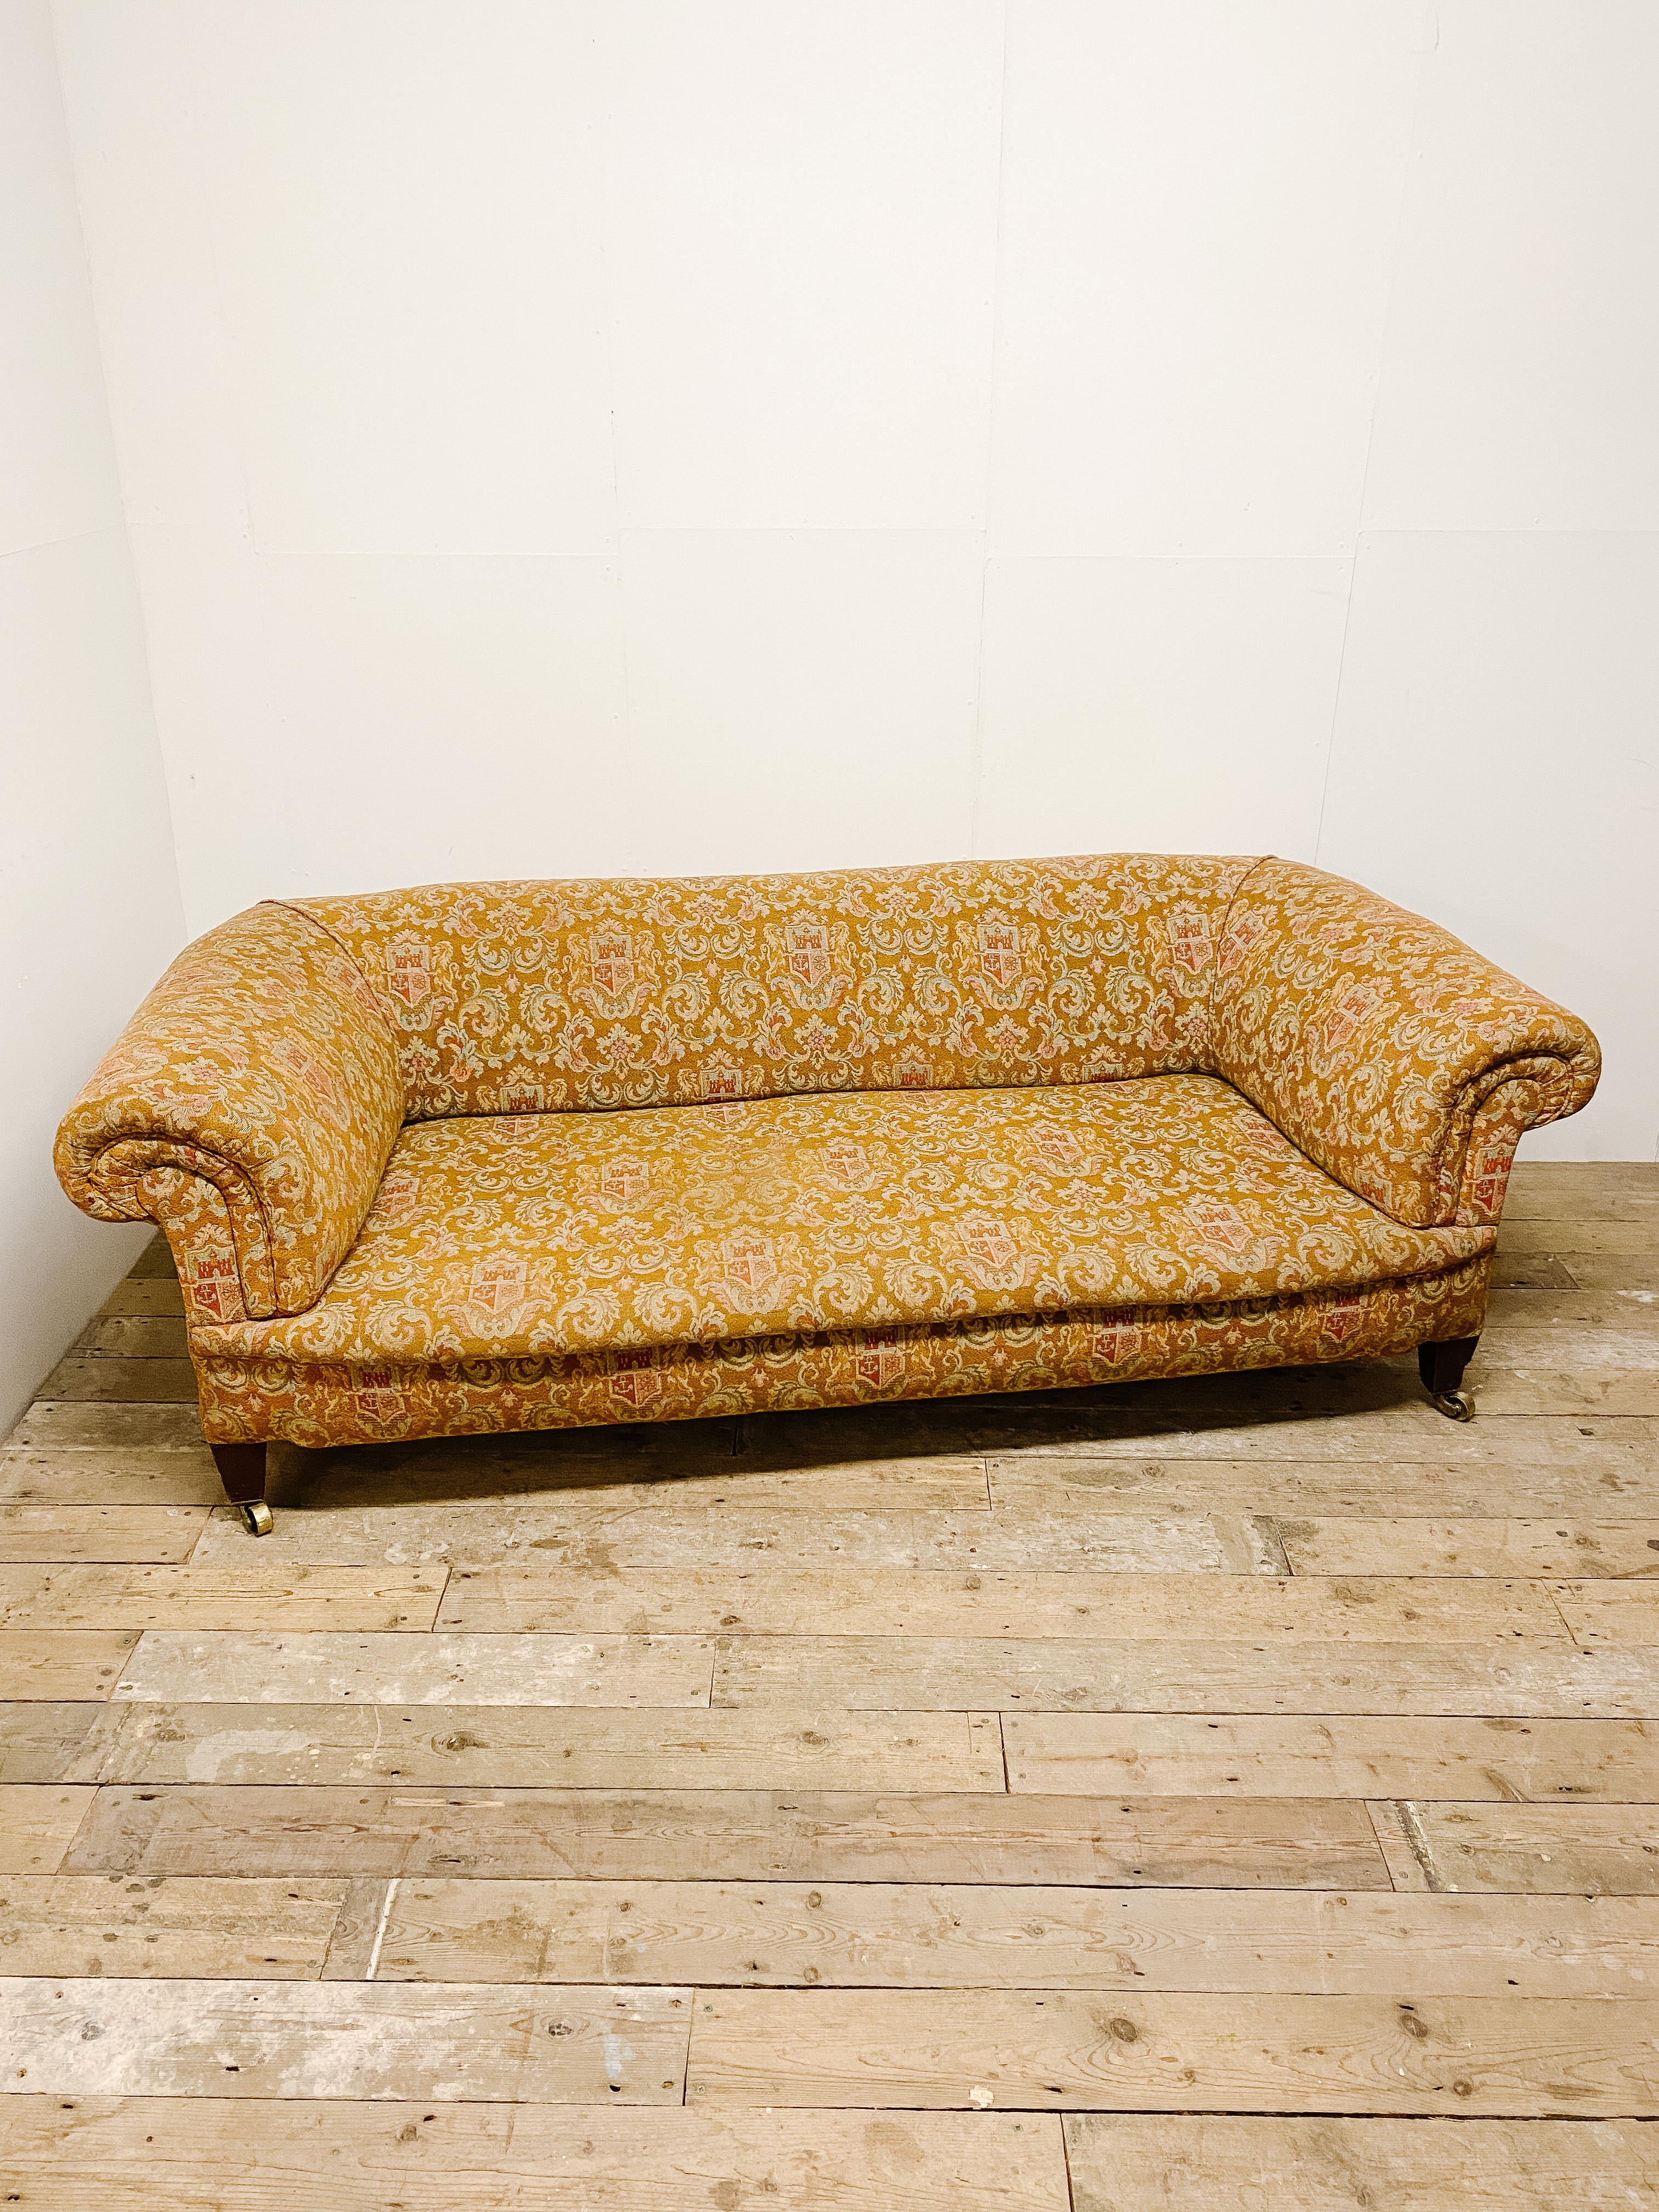 This Chesterfield style C1910 Edwardian sofa is the full package of style, comfort and a statement piece. A comfortable sofa with original upholstery complete and casters. This fabulous strong weave crest fabric has retained its beautiful colouring